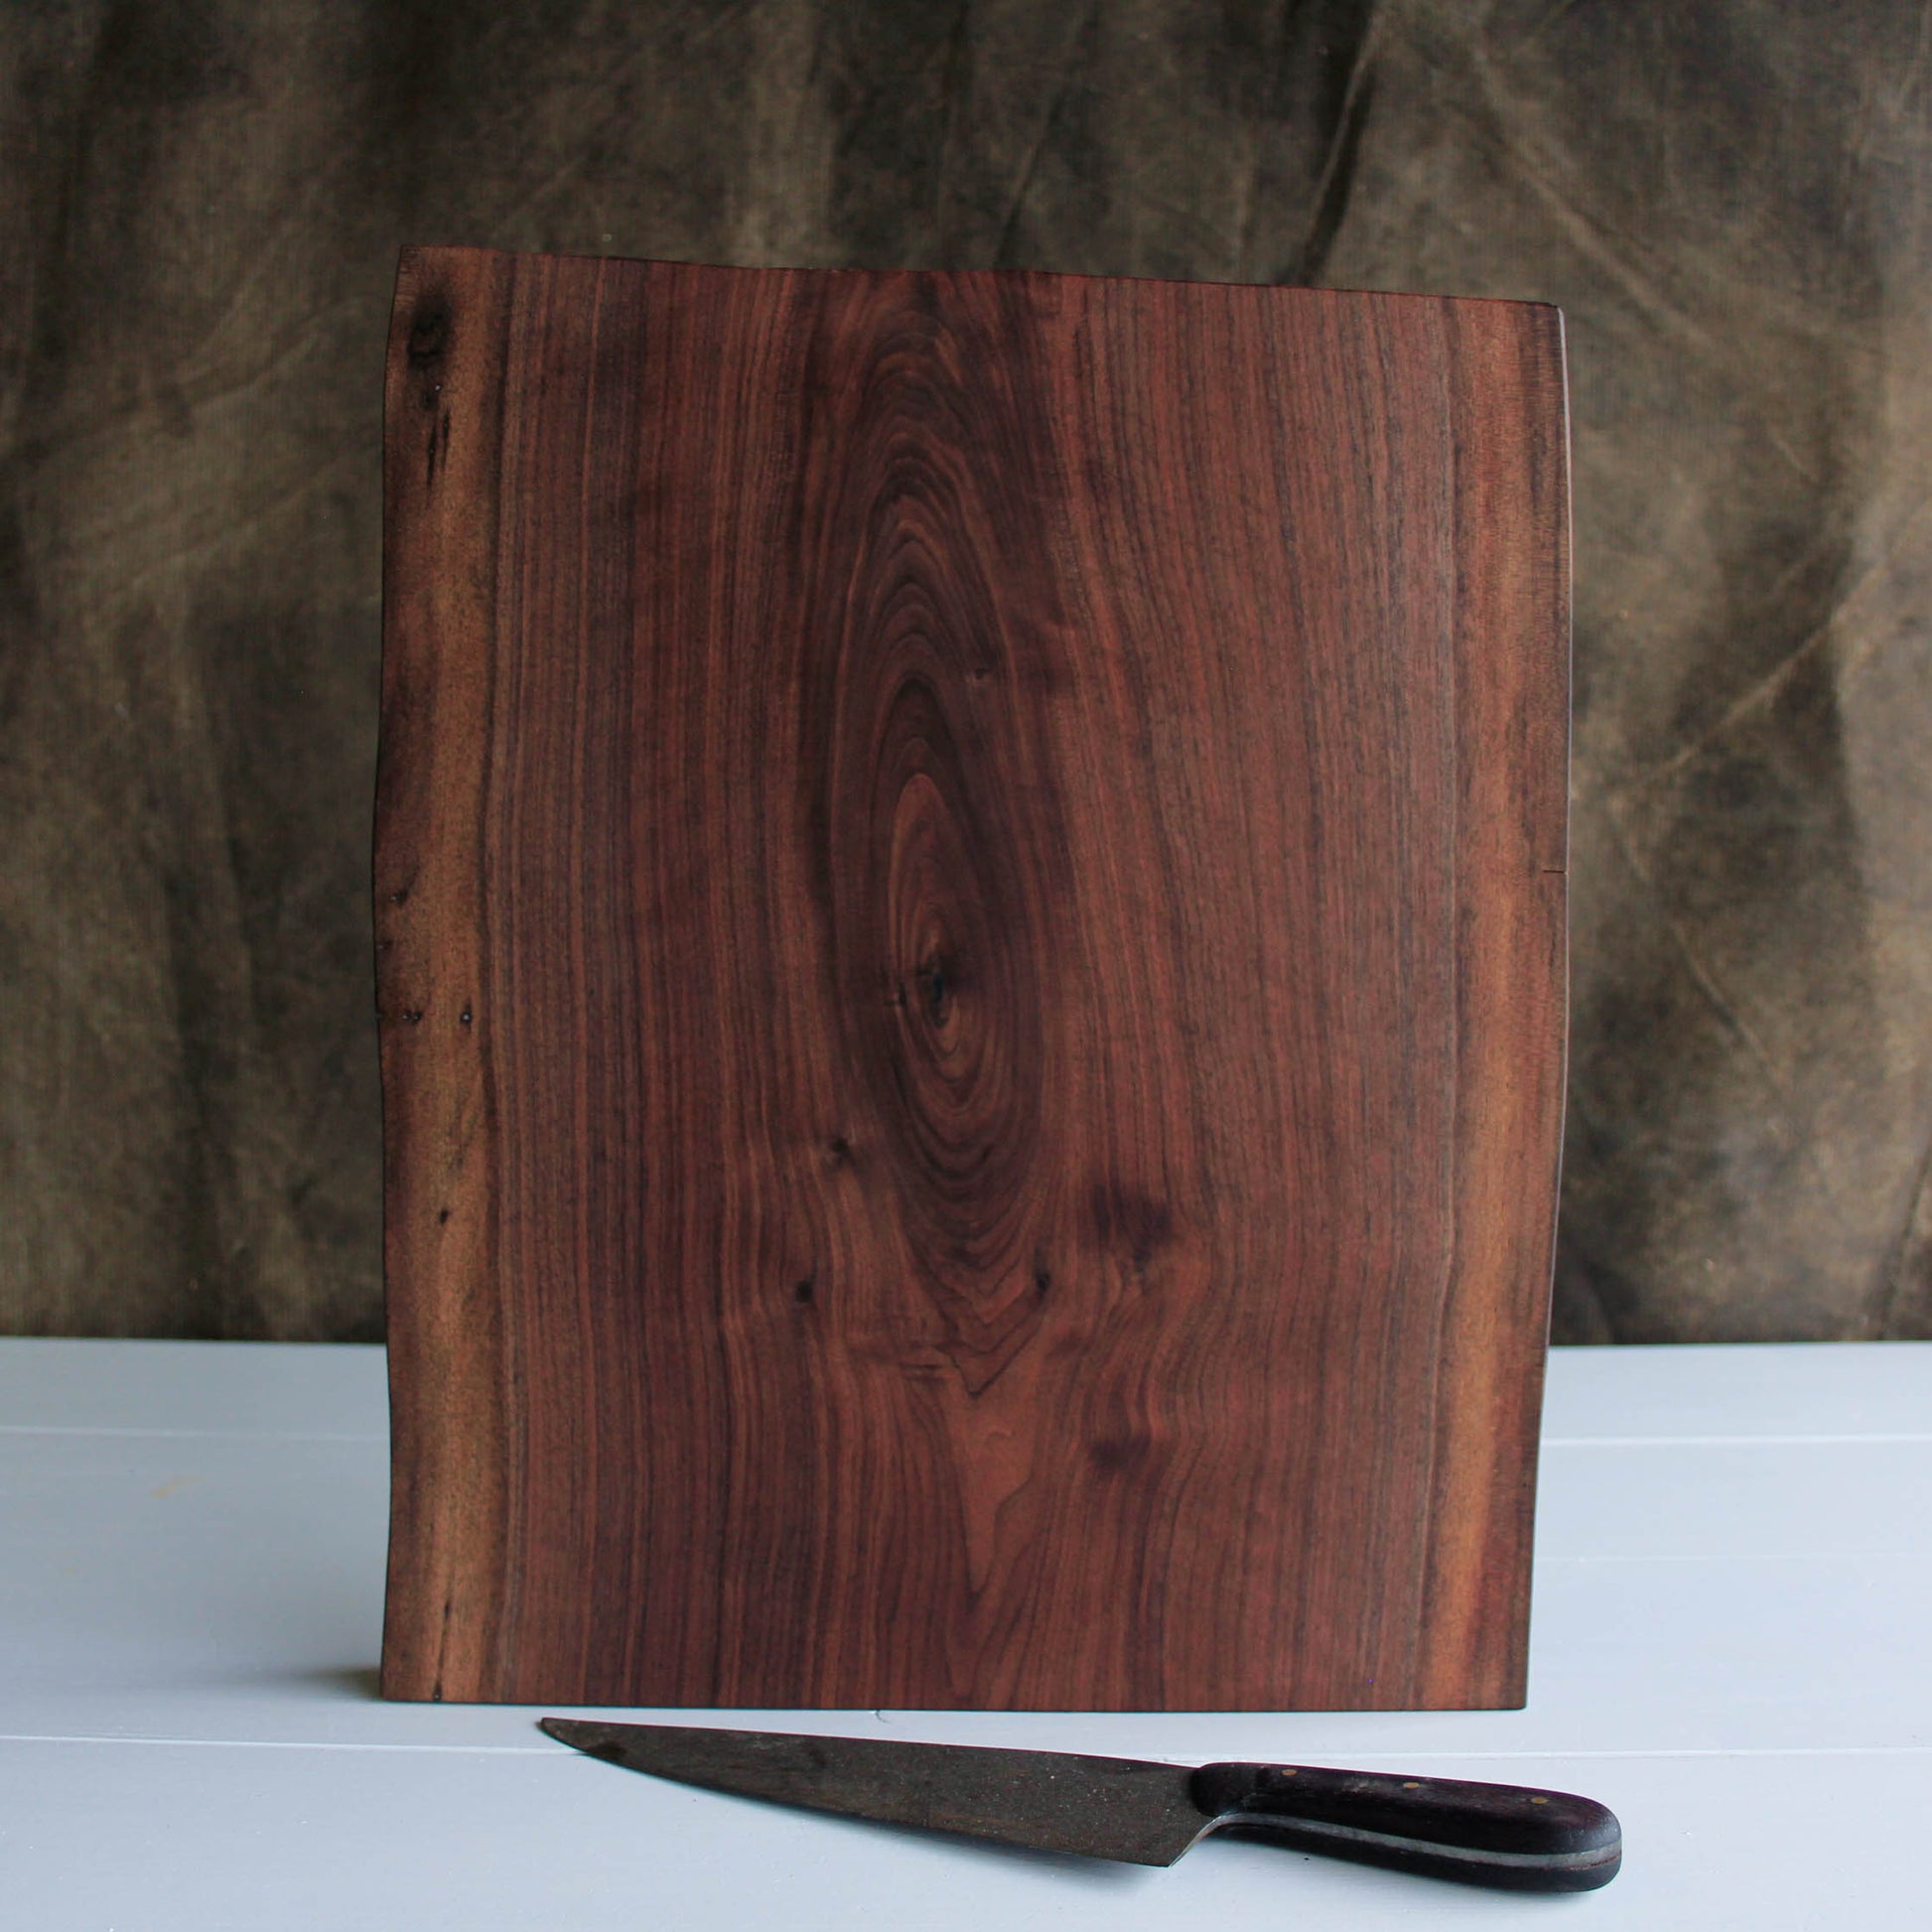 A Picture of a figured walnut cutting board with two live edges standing in front of a kitchen knife